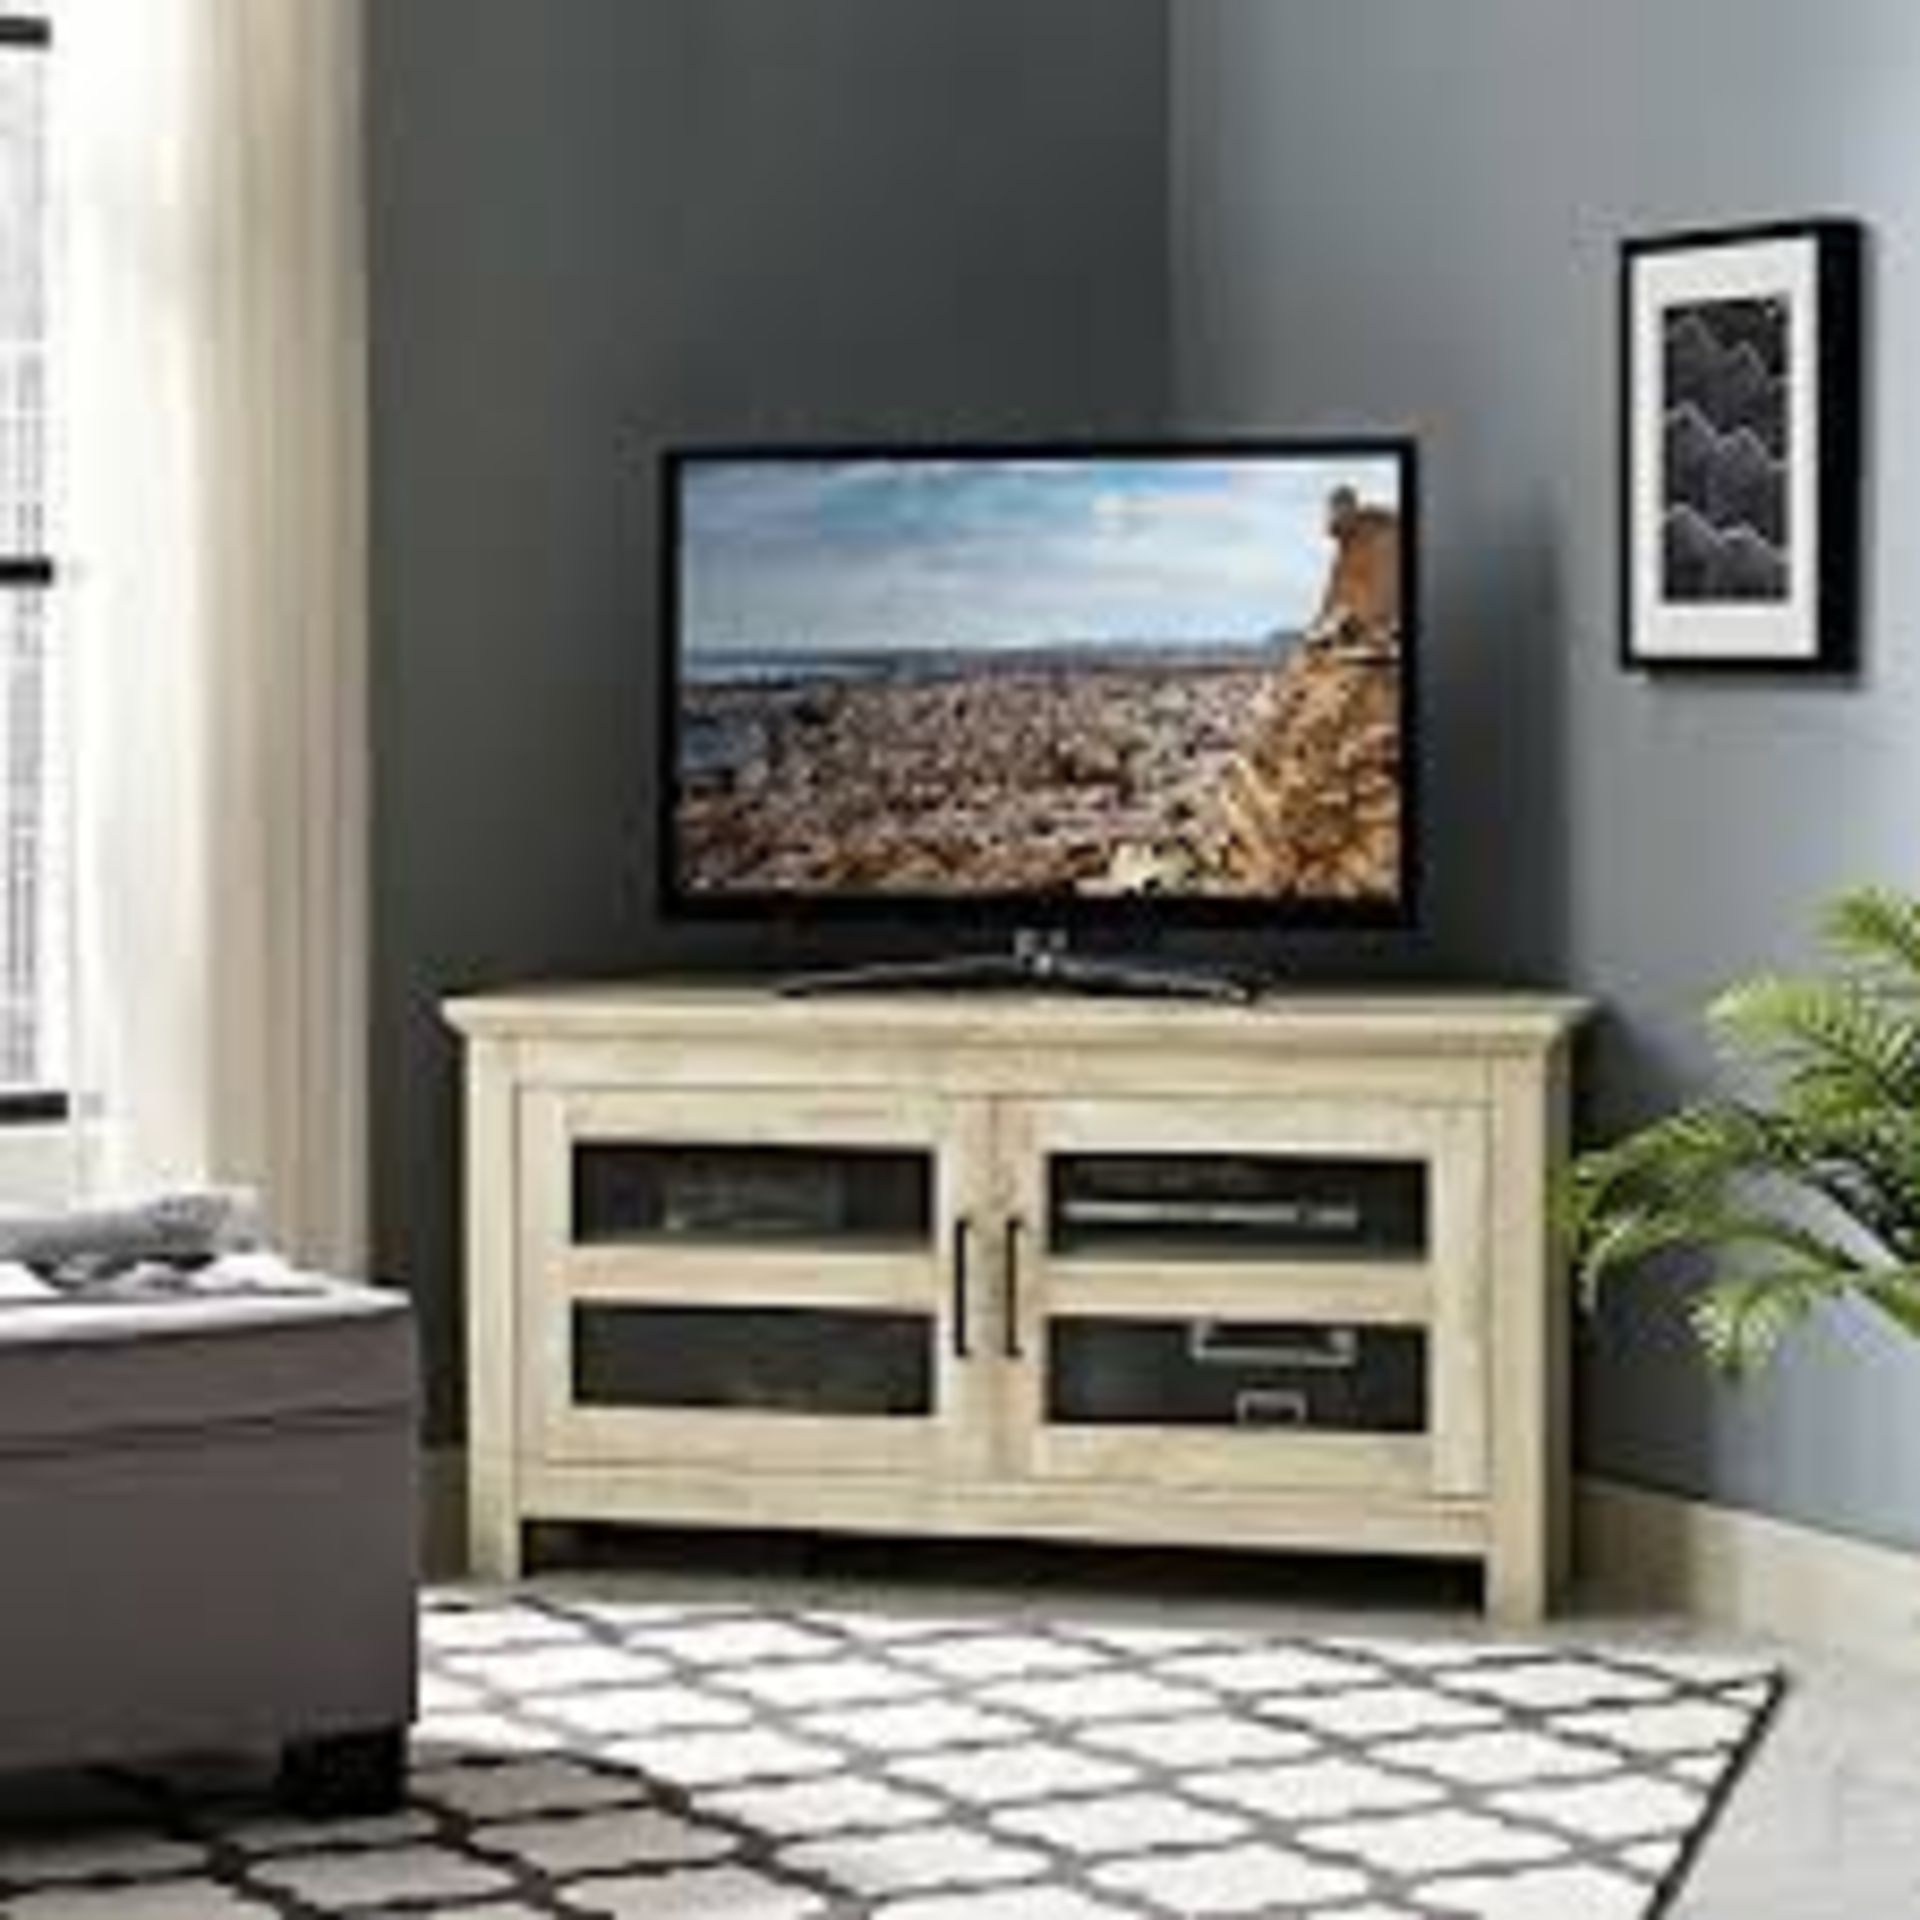 Boxed 44" Drift Wood TV Entertainment Stand RRP £200 (18502) Appraisals Available Upon Request)